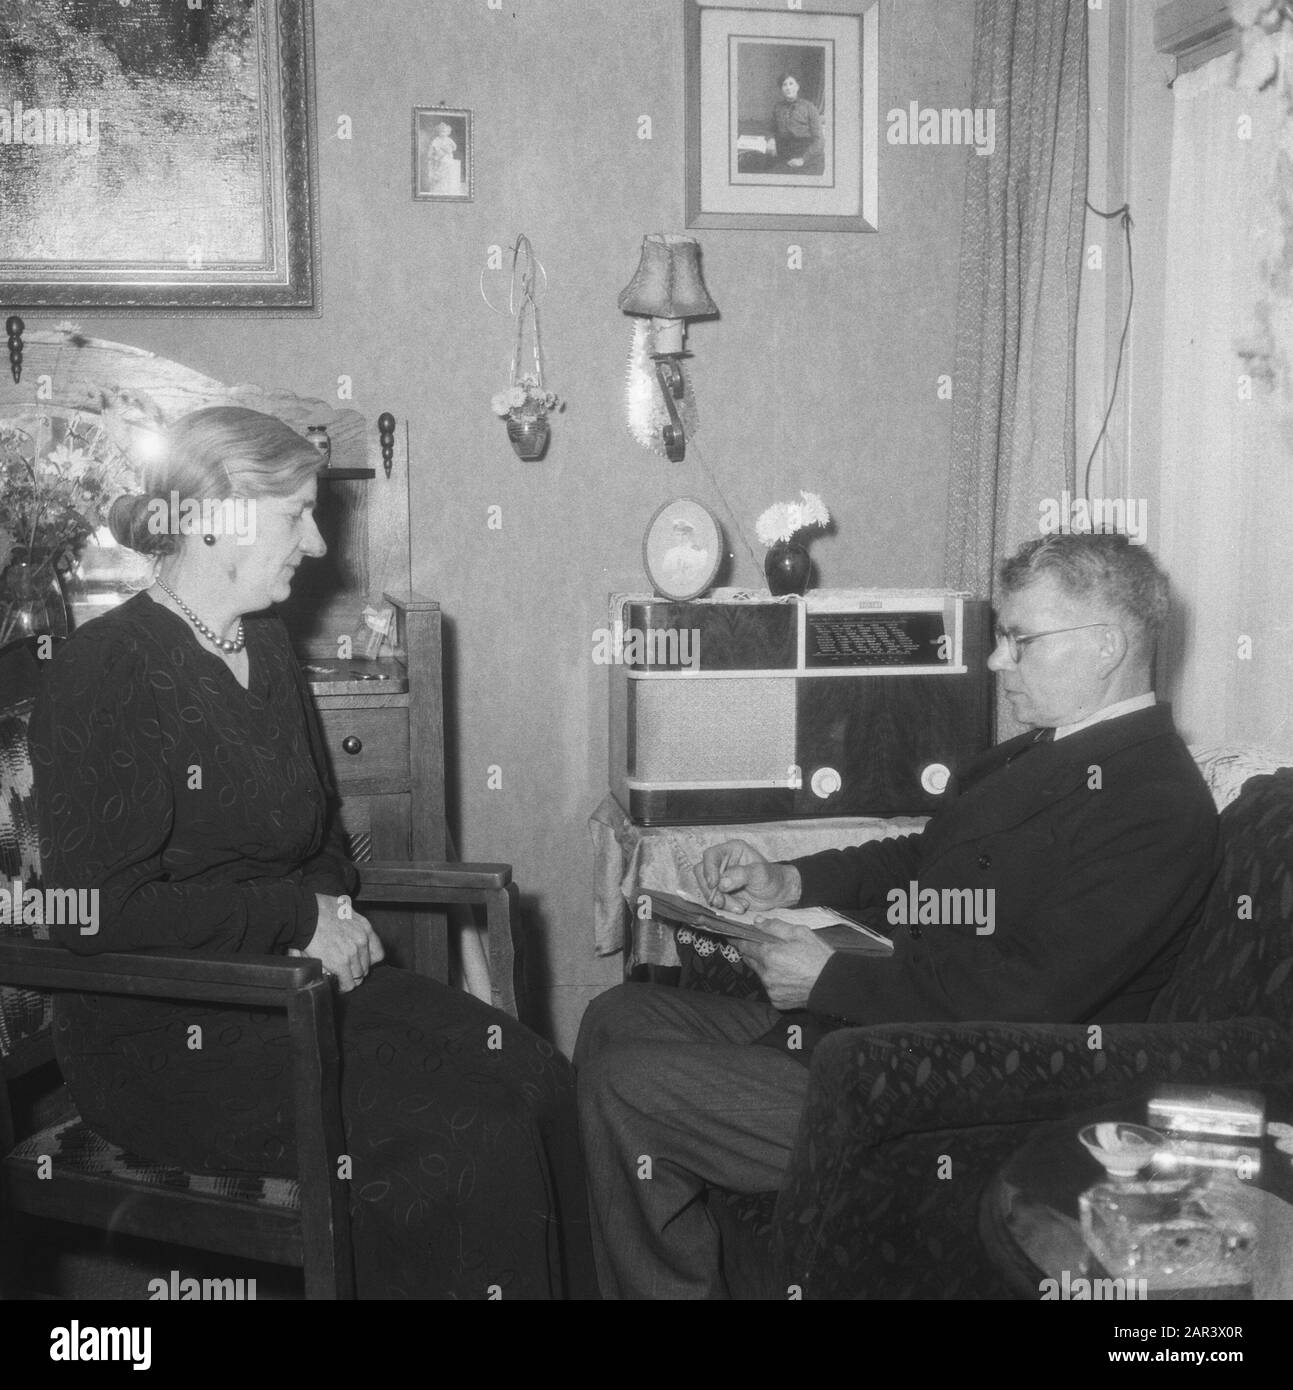 Rising Netherlands  Reportage Rising Netherlands Annotation: Couple listens to the radio Date: November 2, 1945 Location: Eindhoven Keywords: radio, information Institution name: Radio Rising Netherlands Stock Photo